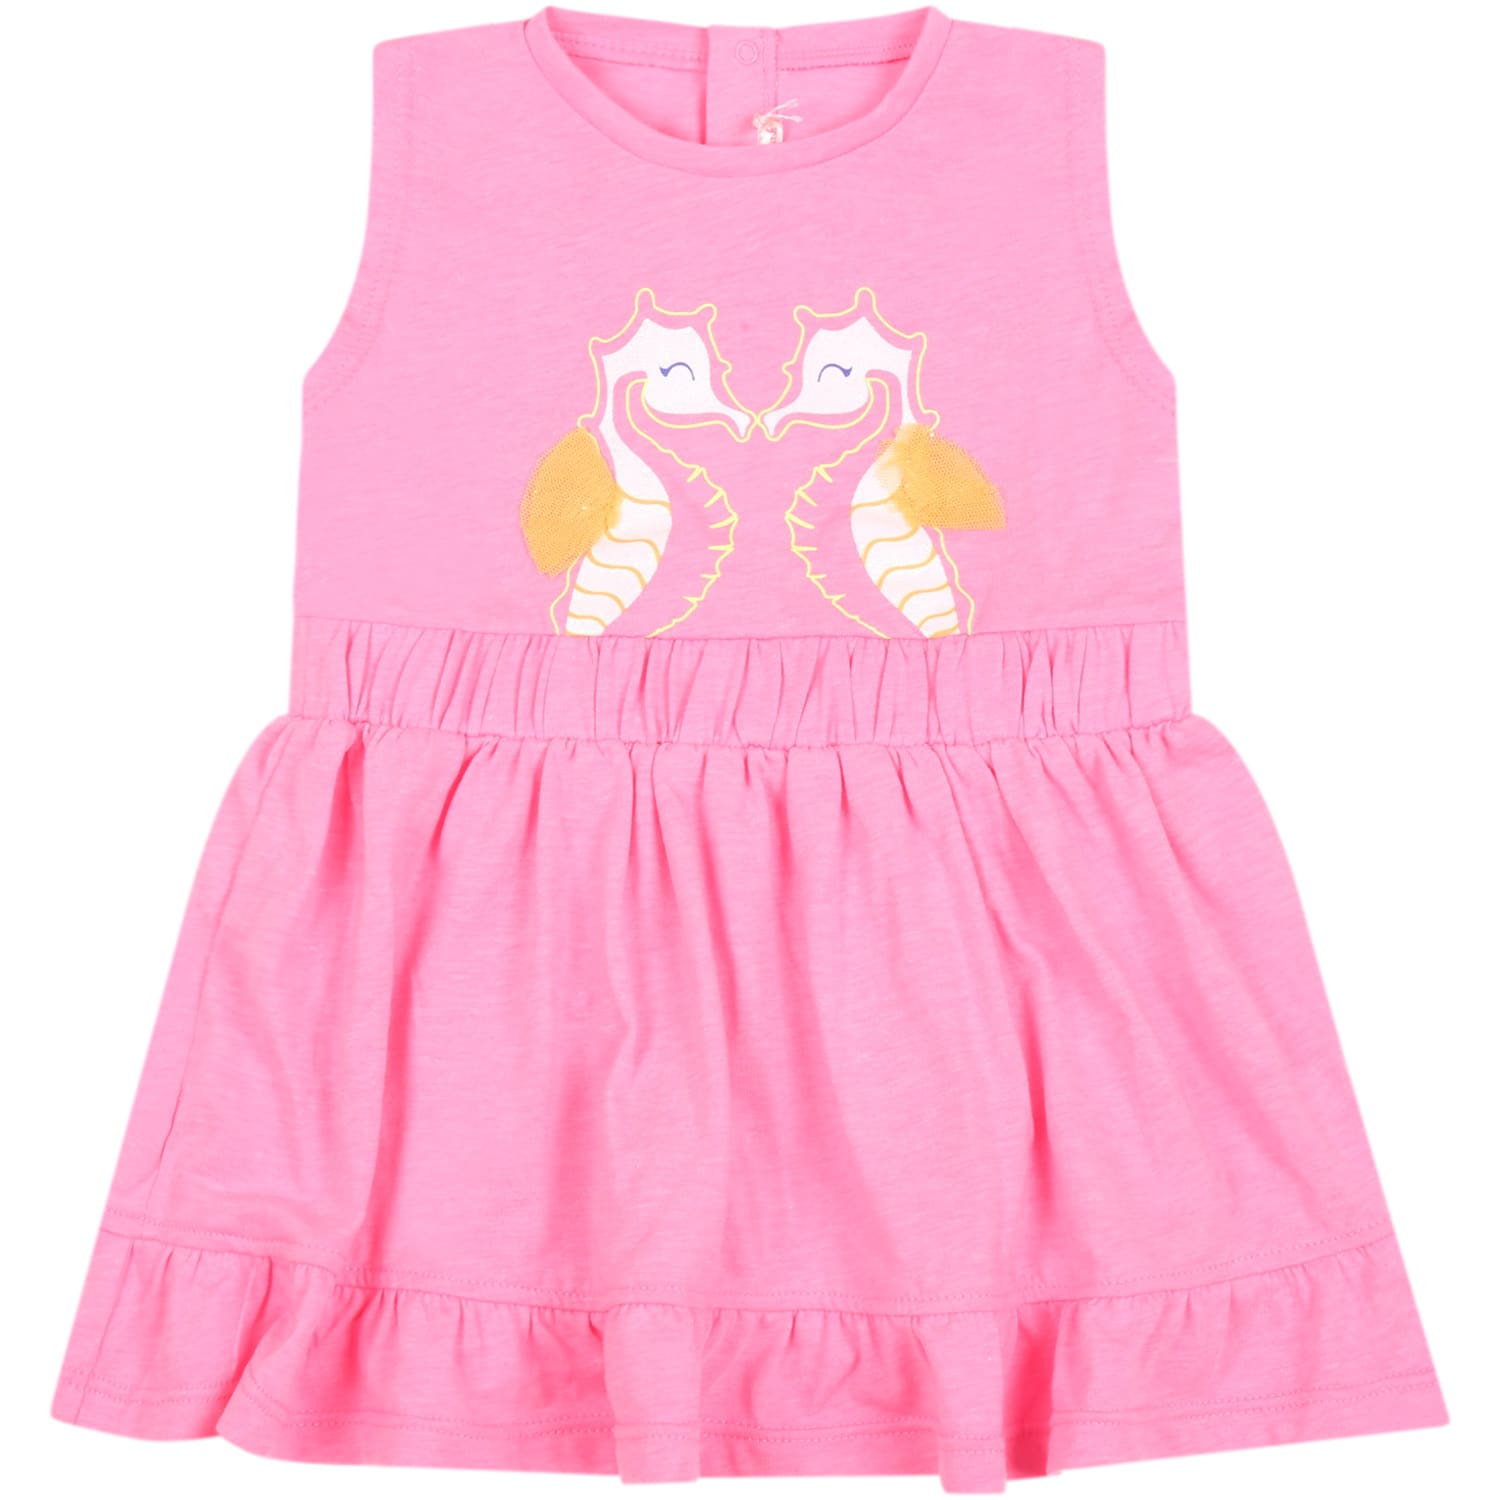 Billieblush Pink Dress For Baby Girl With Seahorses